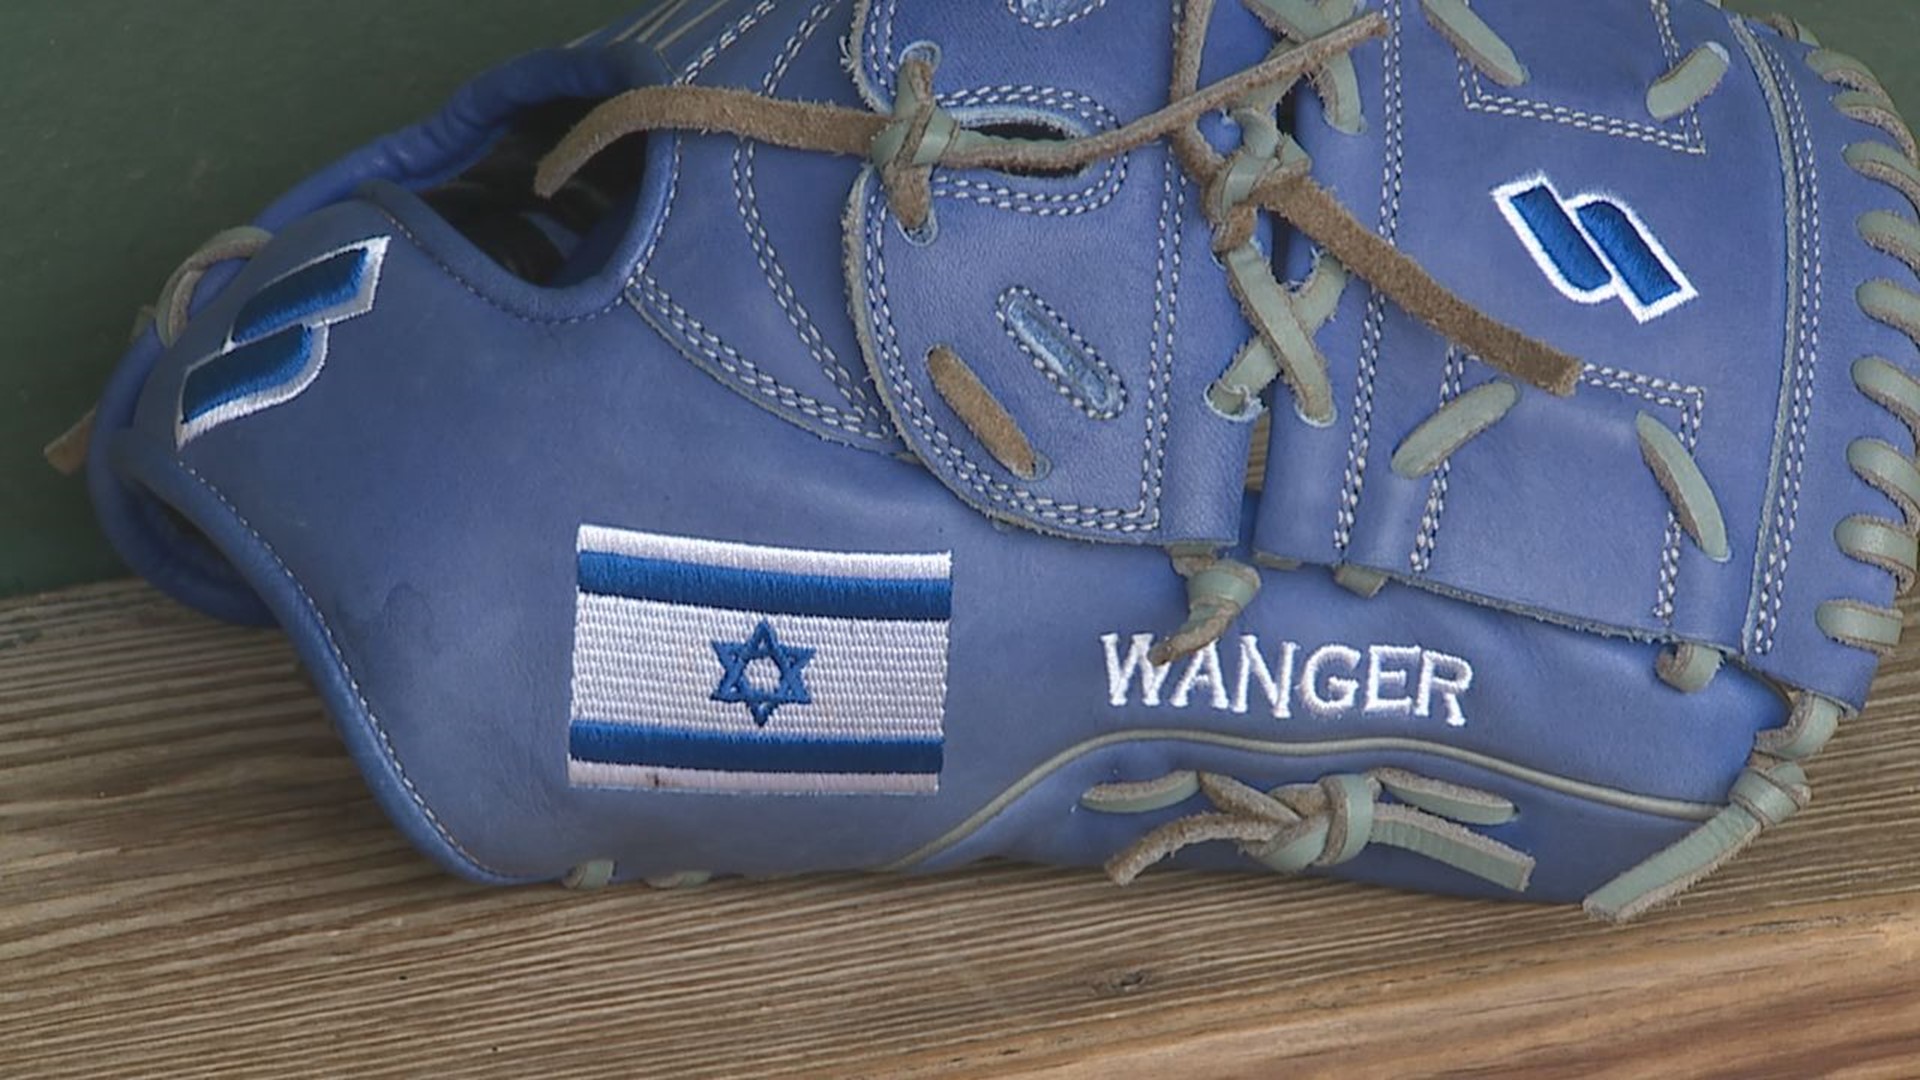 A pair of Lancaster Barnstormers will play for Israel's Olympic baseball team in Tokyo.  Pitcher Ben Wanger joins the Sunday Sitdown to talk about making history.